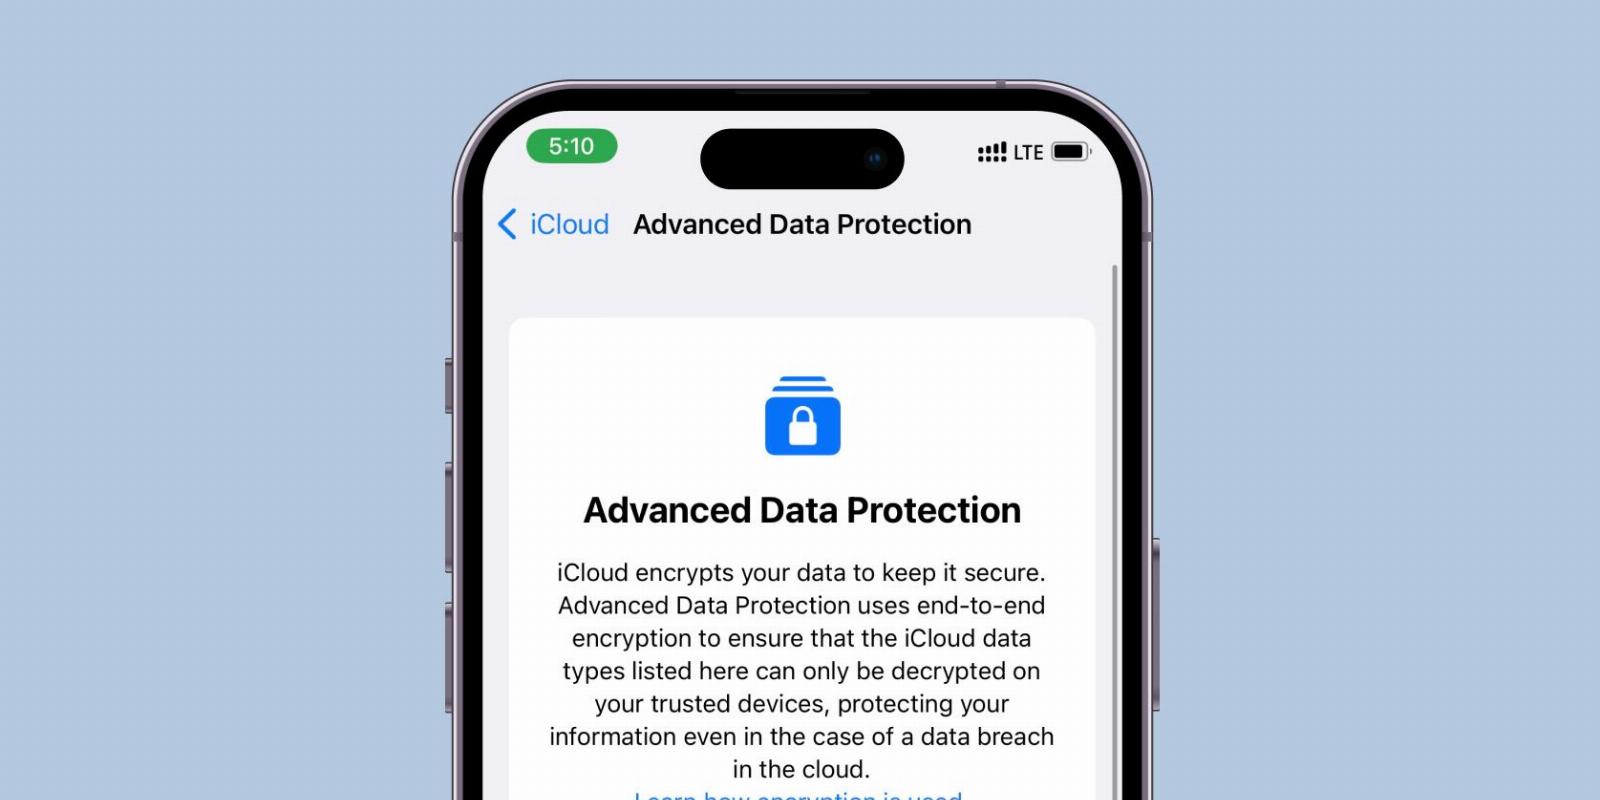 Apple’s New Data Protection, Contact Key Verification, and Security Key Features Explained